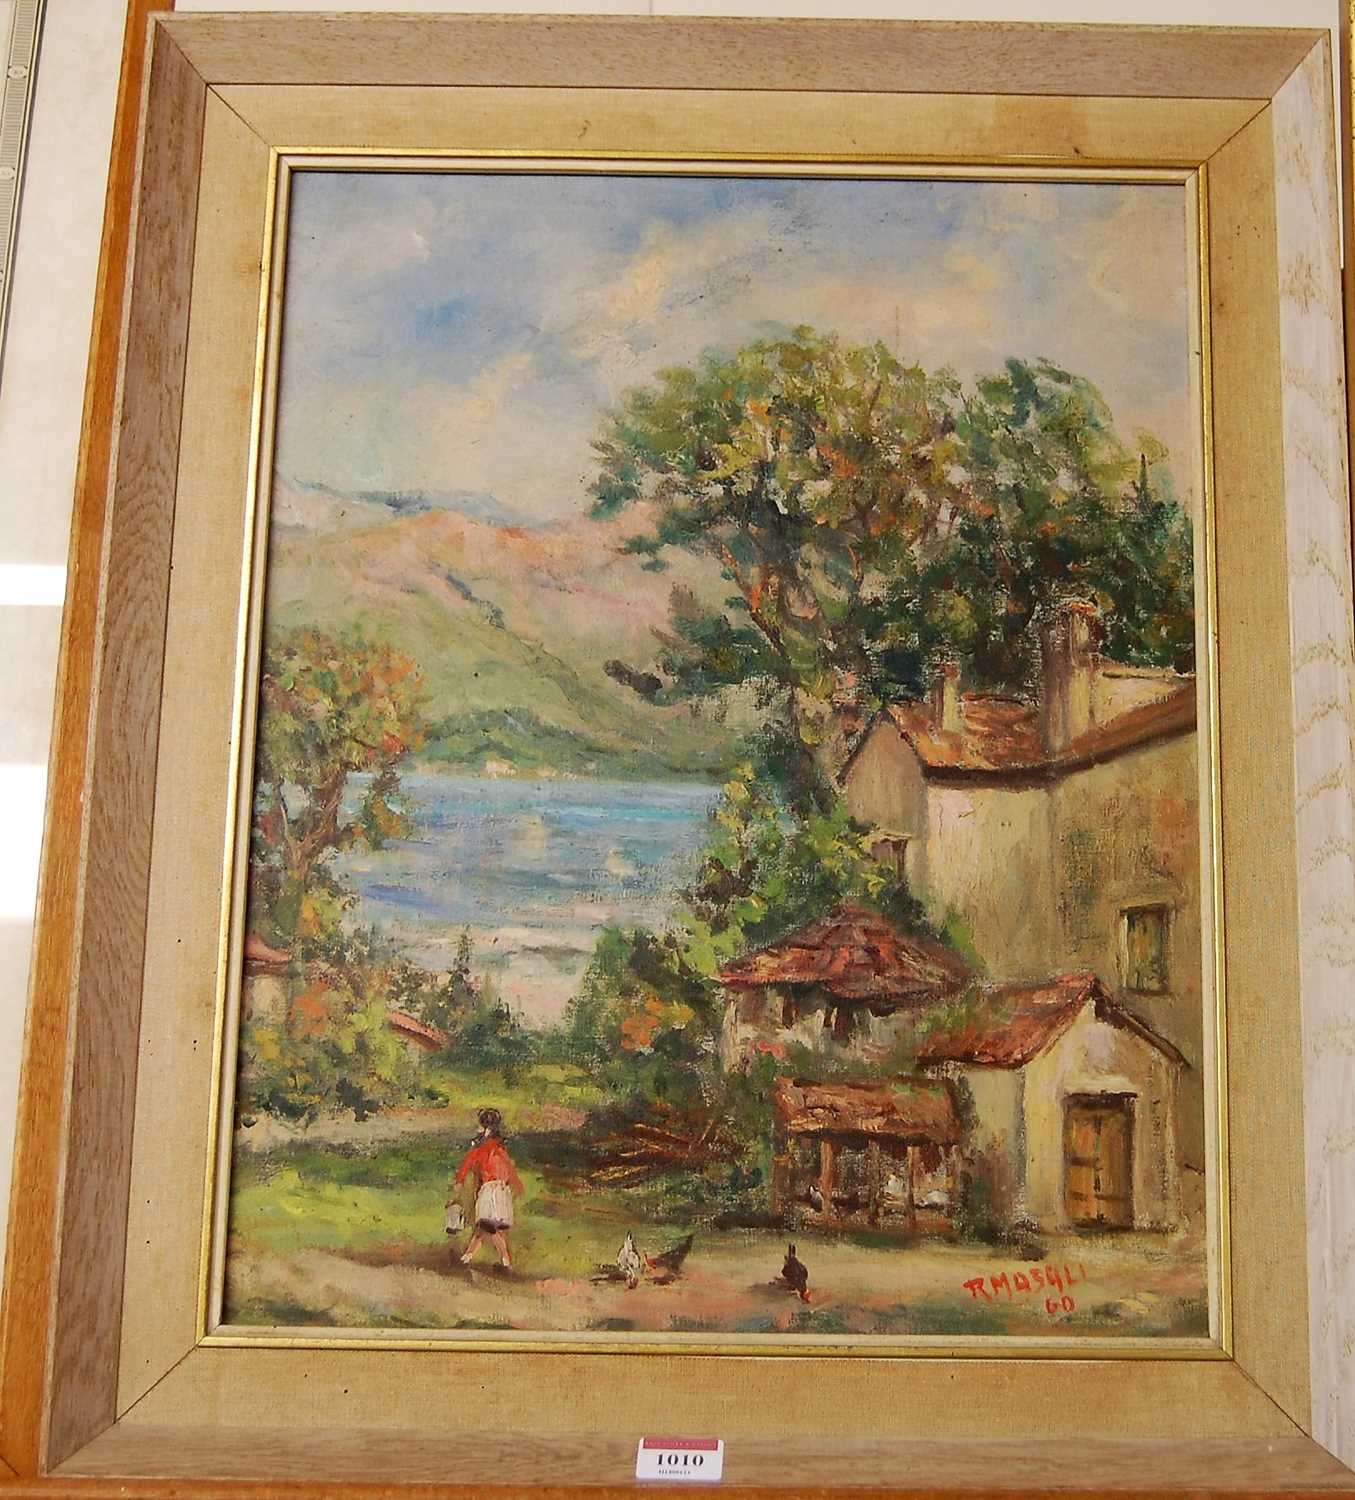 R. de Masali - Bremo Griante, oil on canvas, signed and dated '60 lower right, 47 x 37cm